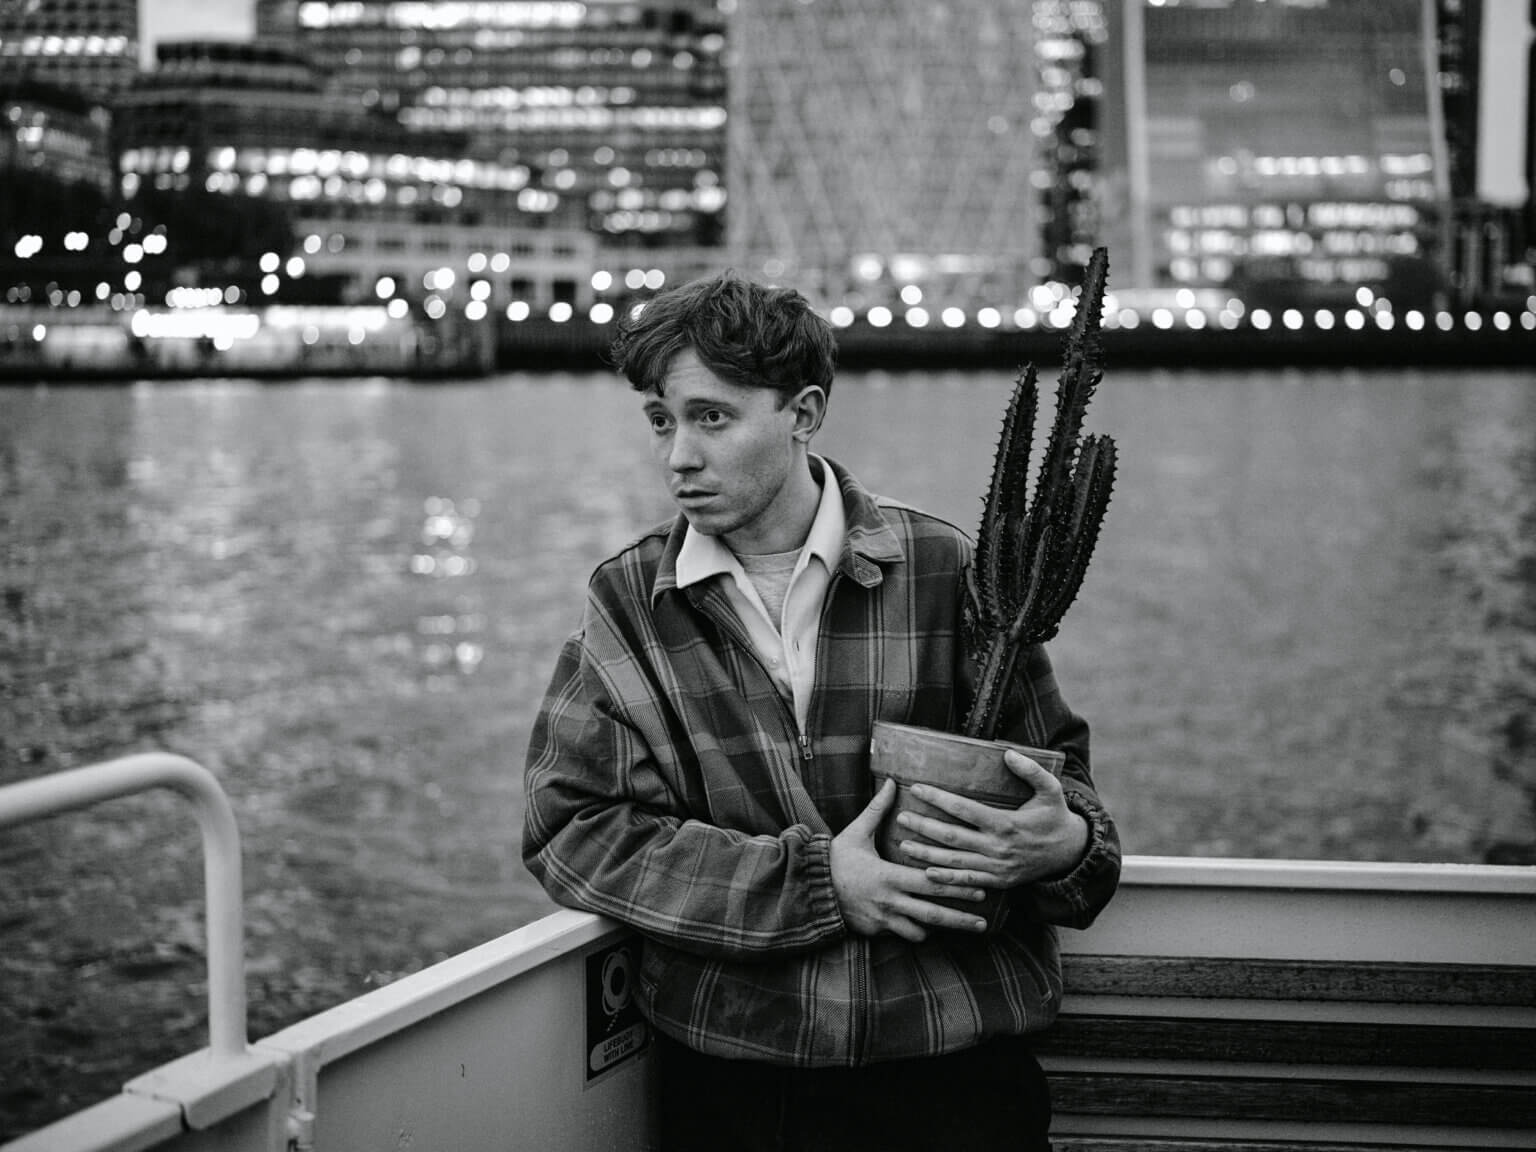 King Krule debuts new single “If Only It Was Warmth"